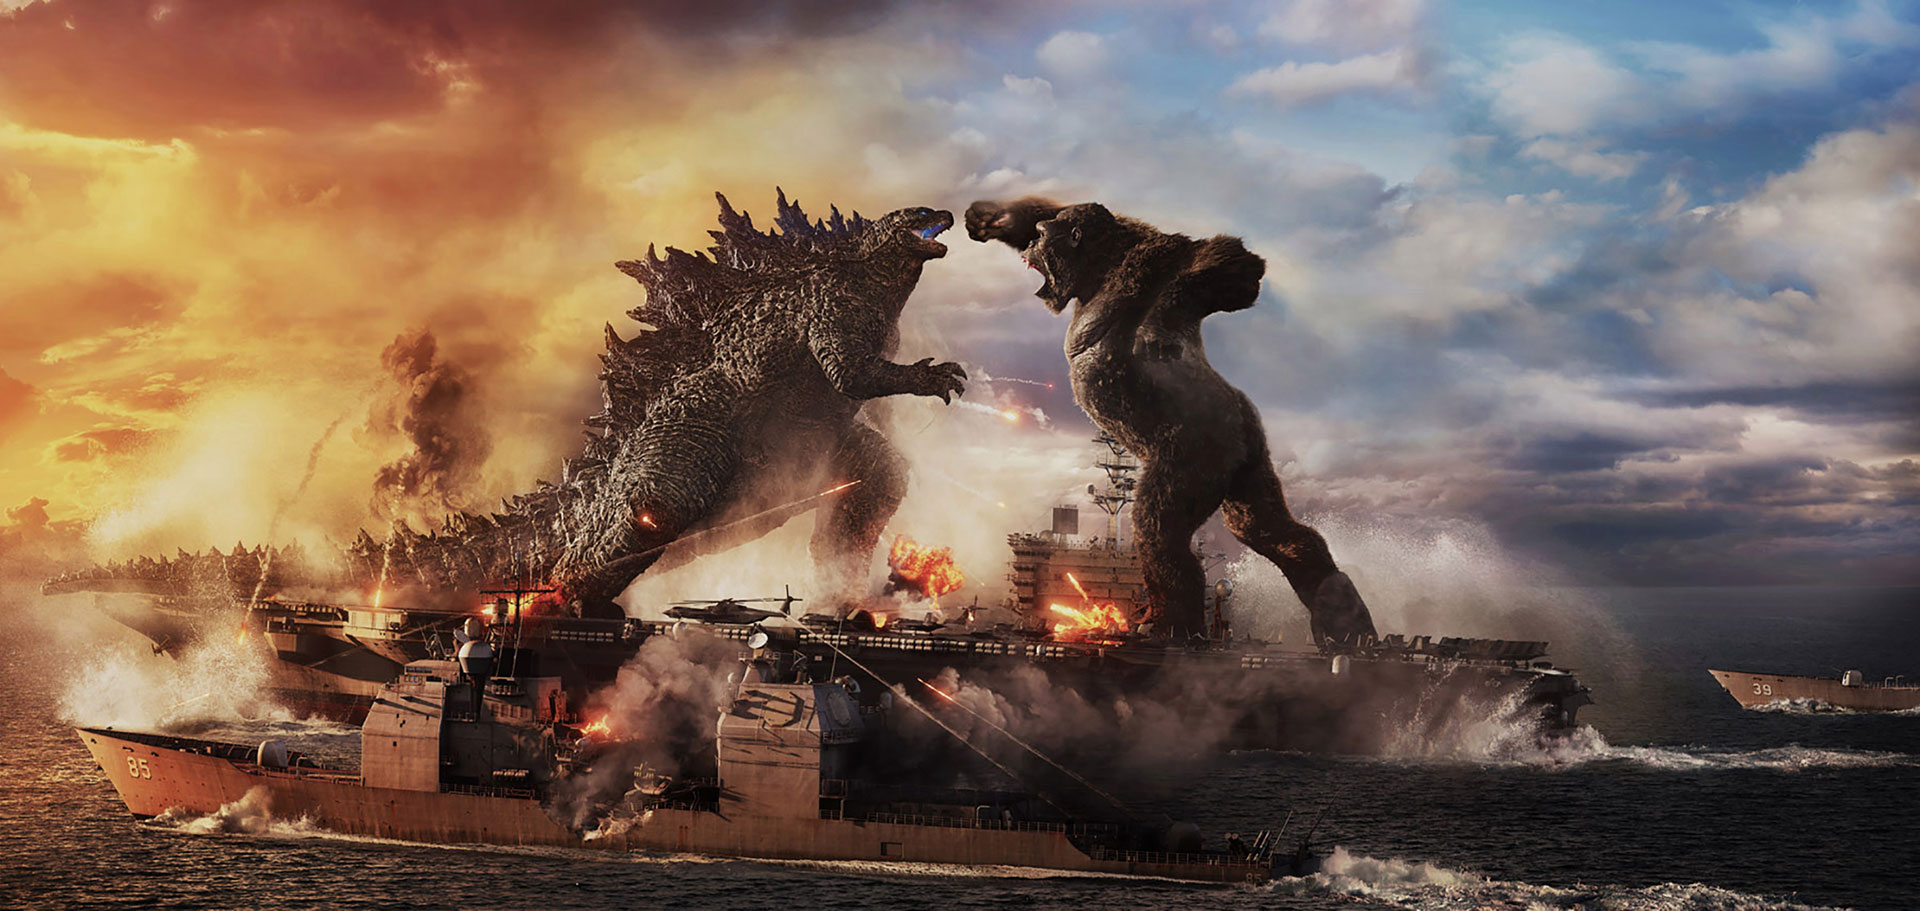 Cover image of Kong and Godzilla fighting